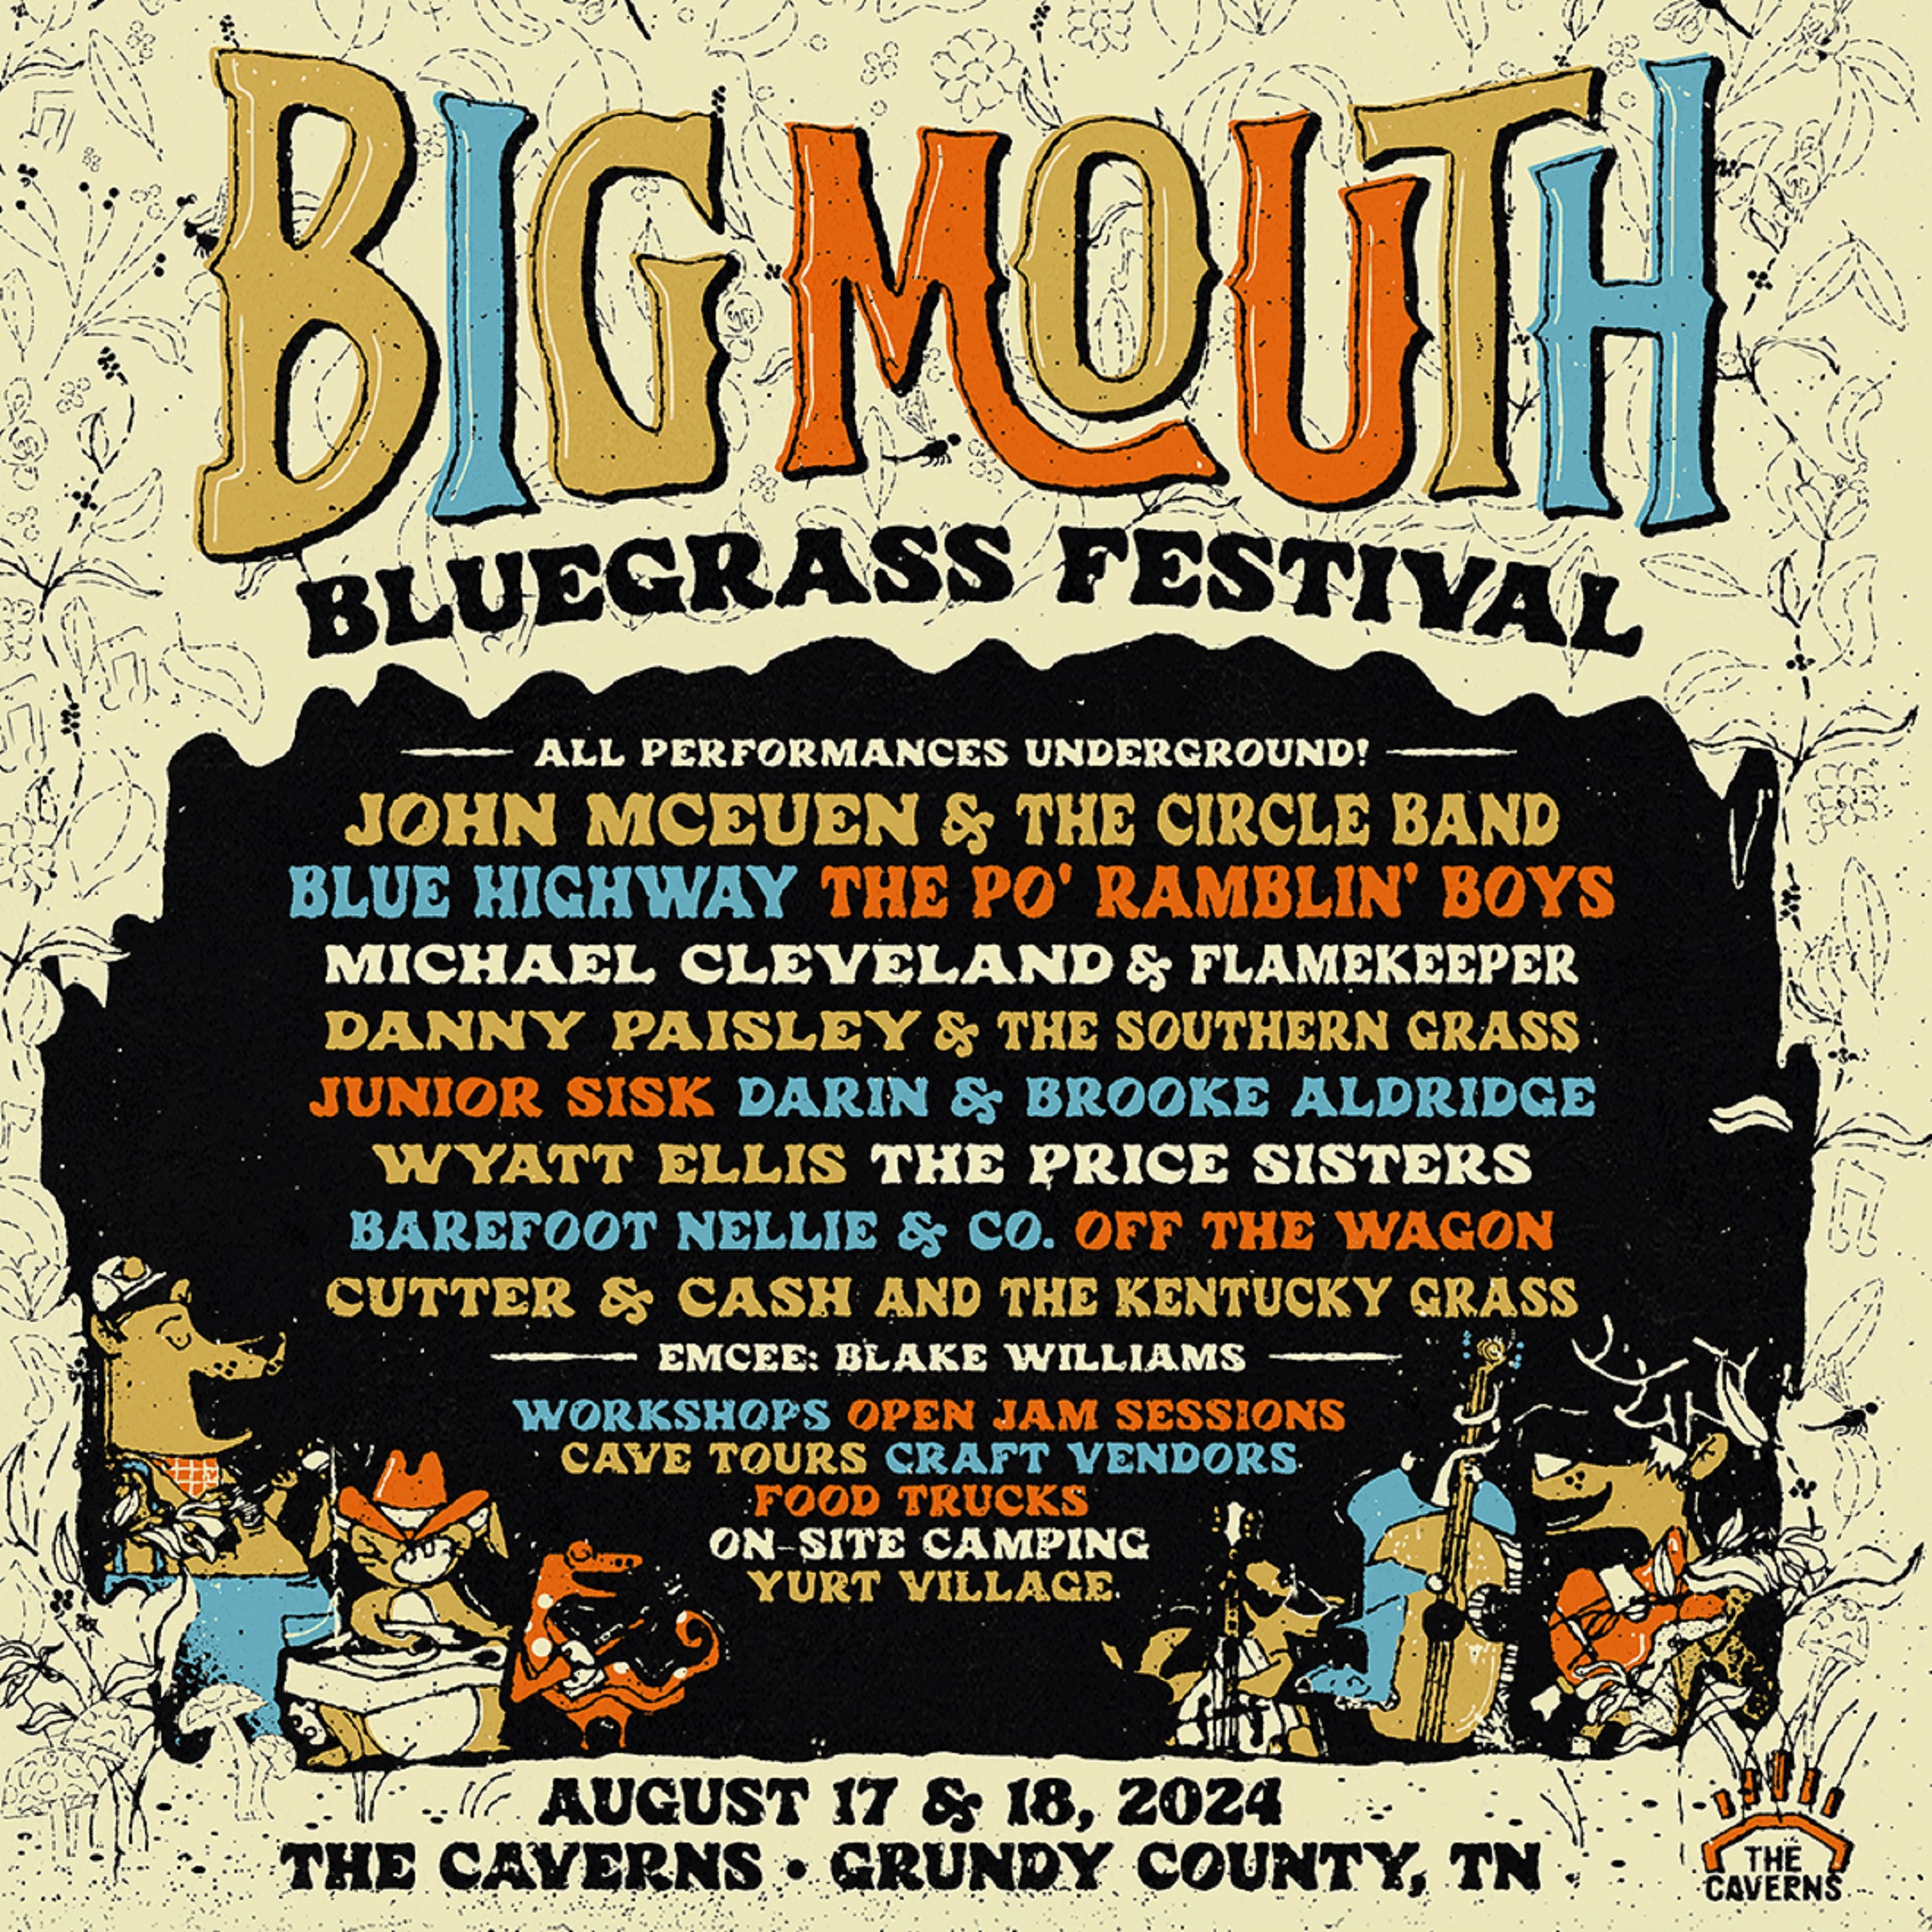 Big Mouth Bluegrass Festival at The Caverns